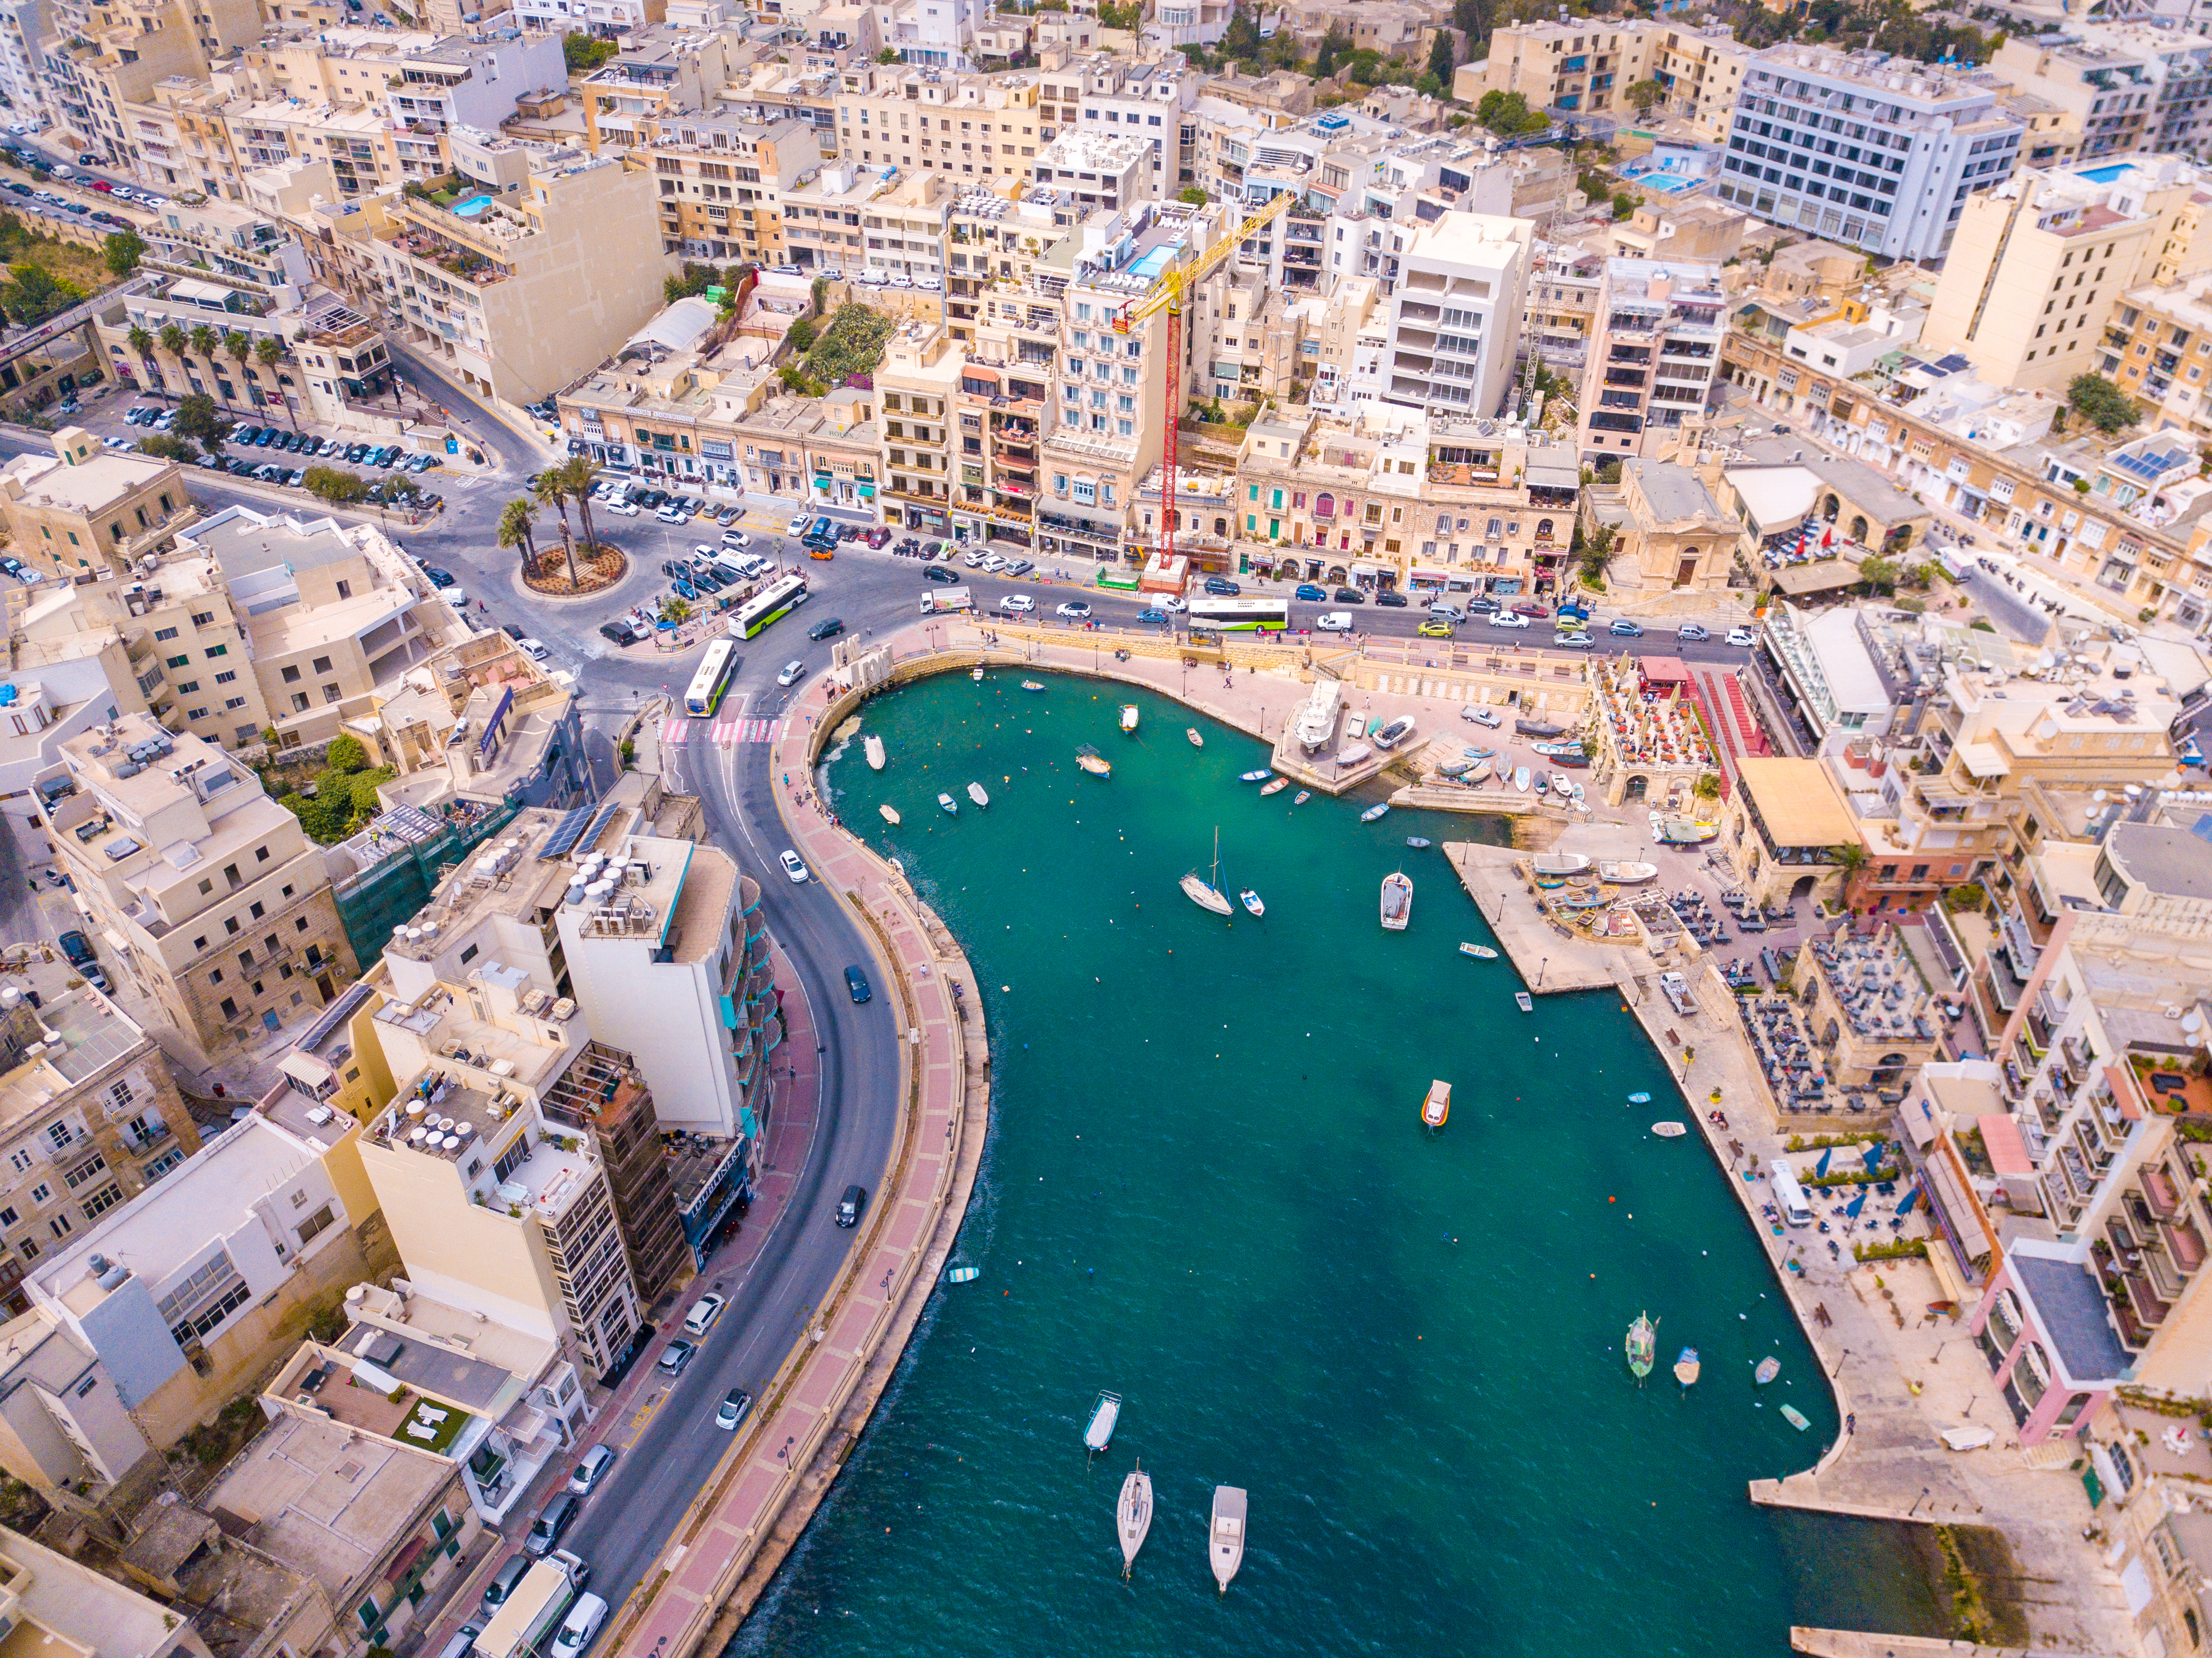 Aerial view of the Spinola Bay, St. Julians and Sliema town on Malta